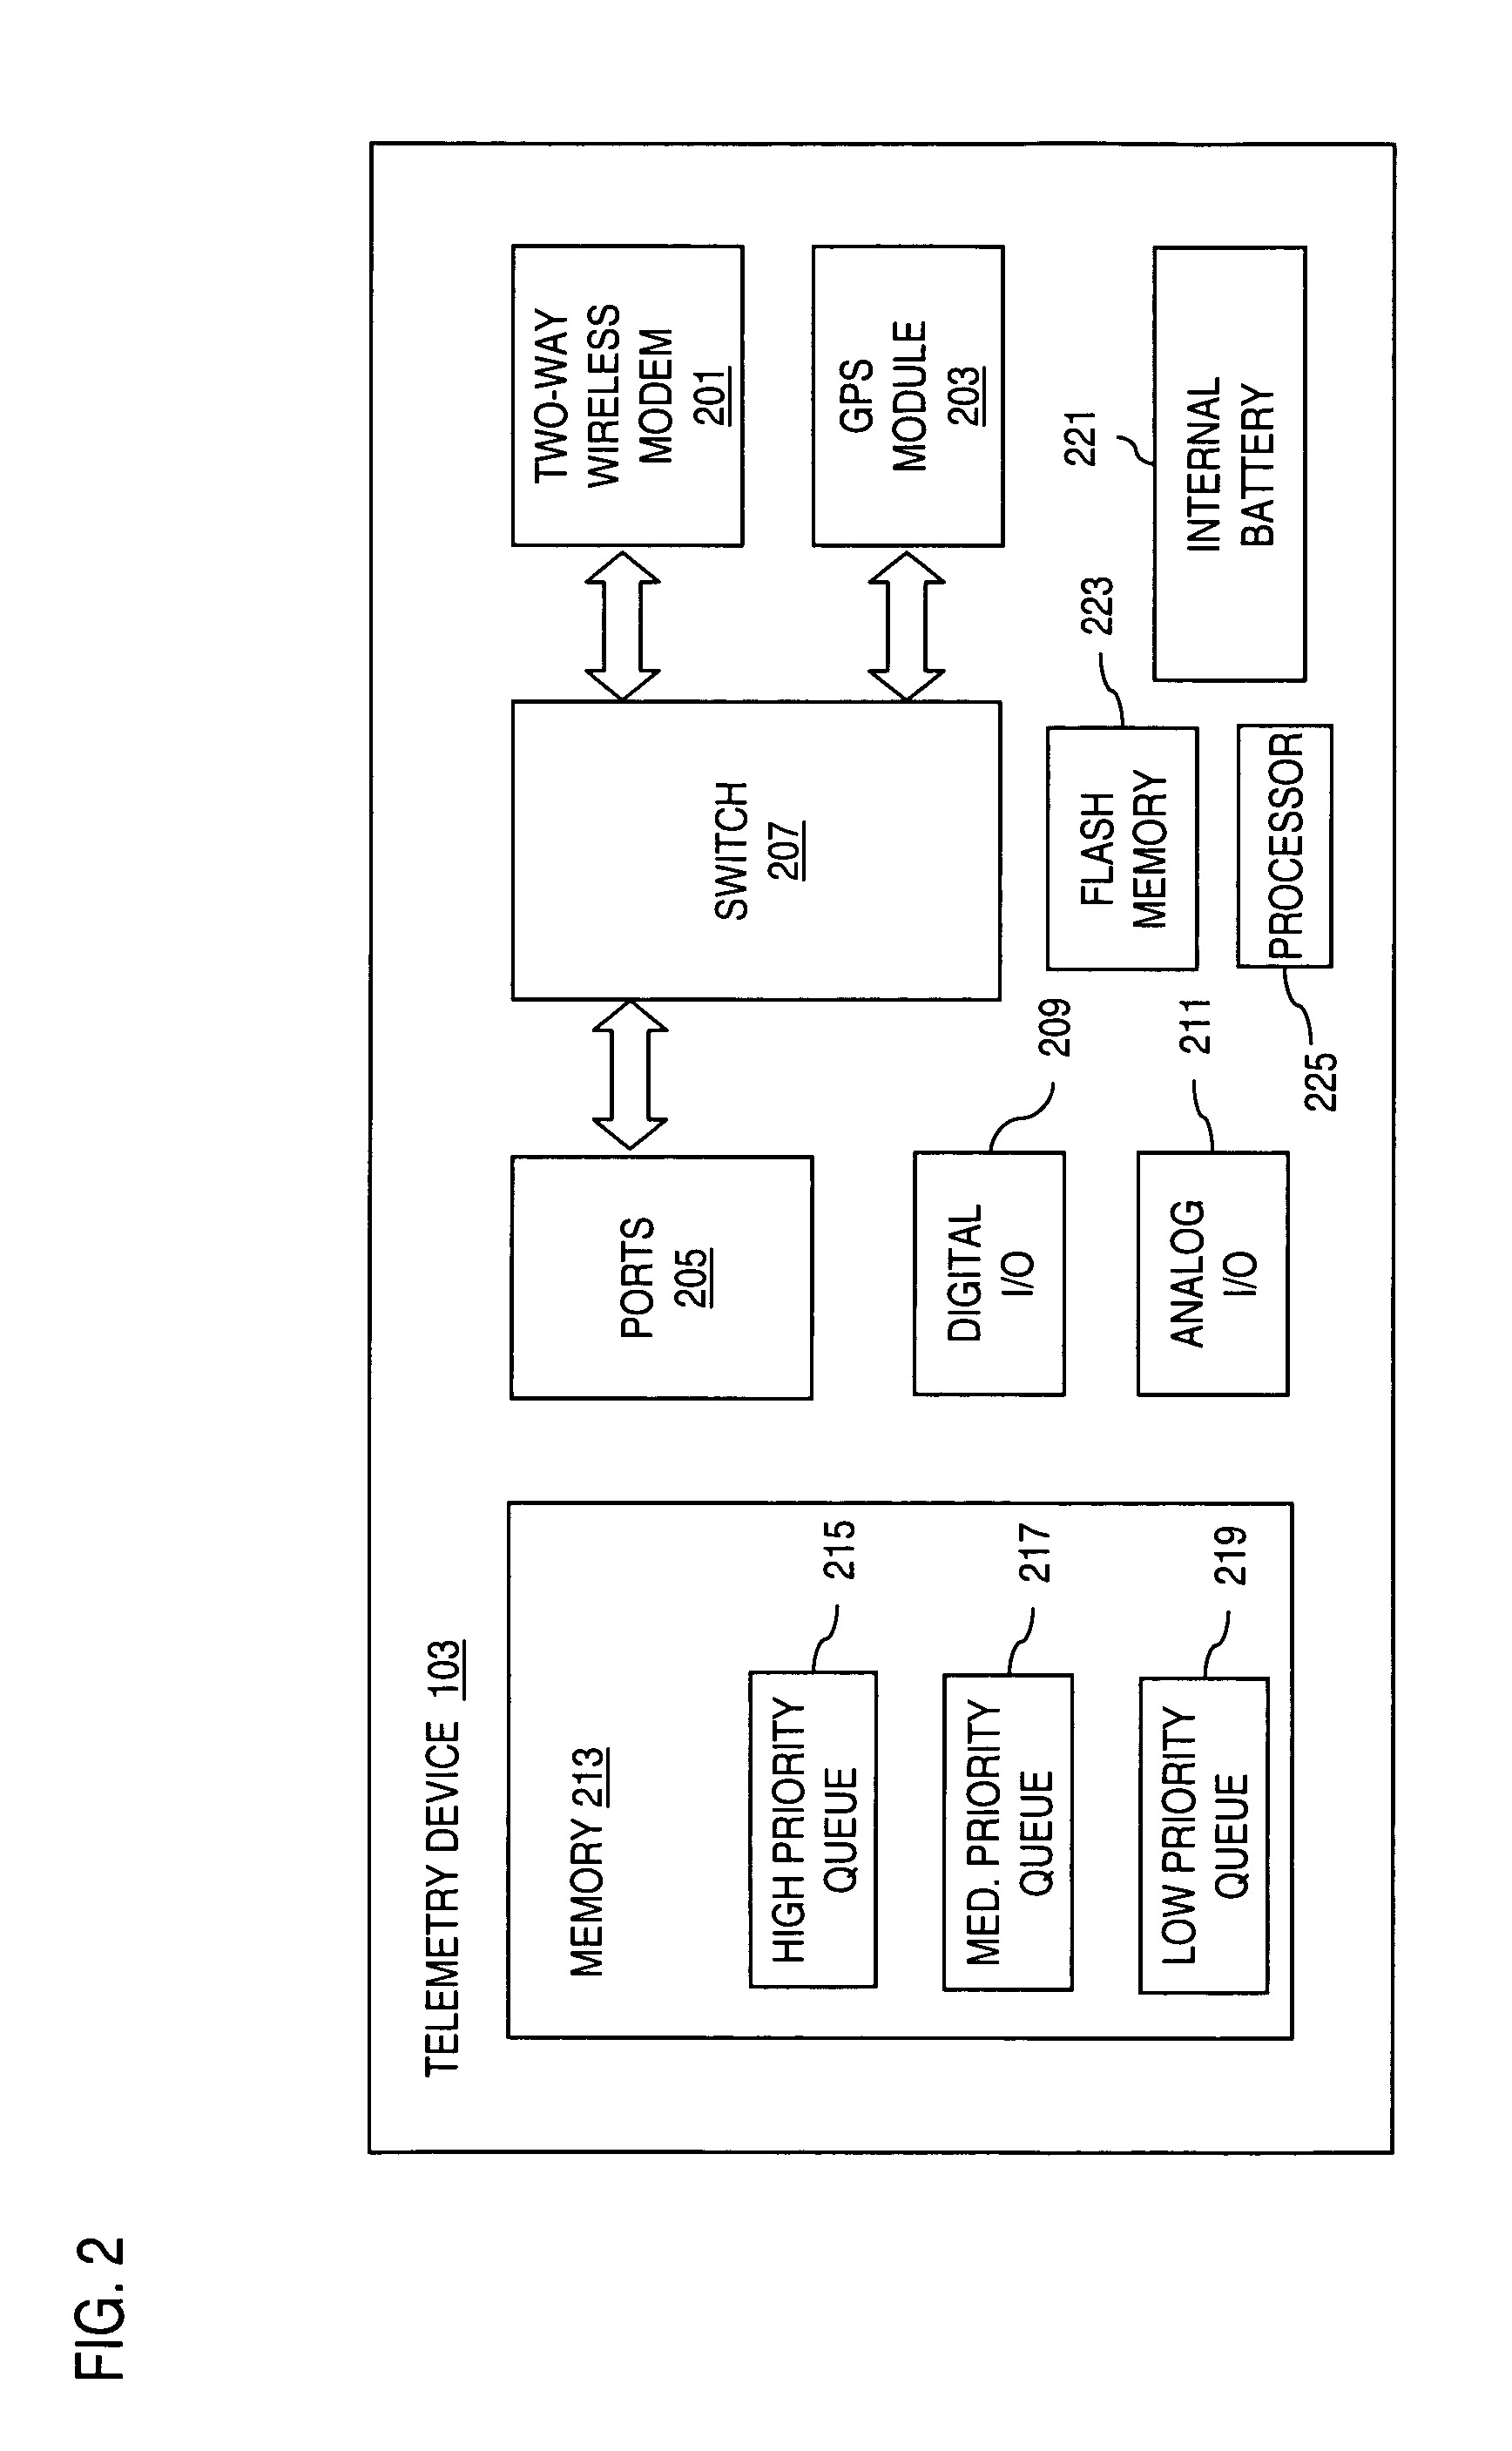 Method and system for interfacing with mobile telemetry devices